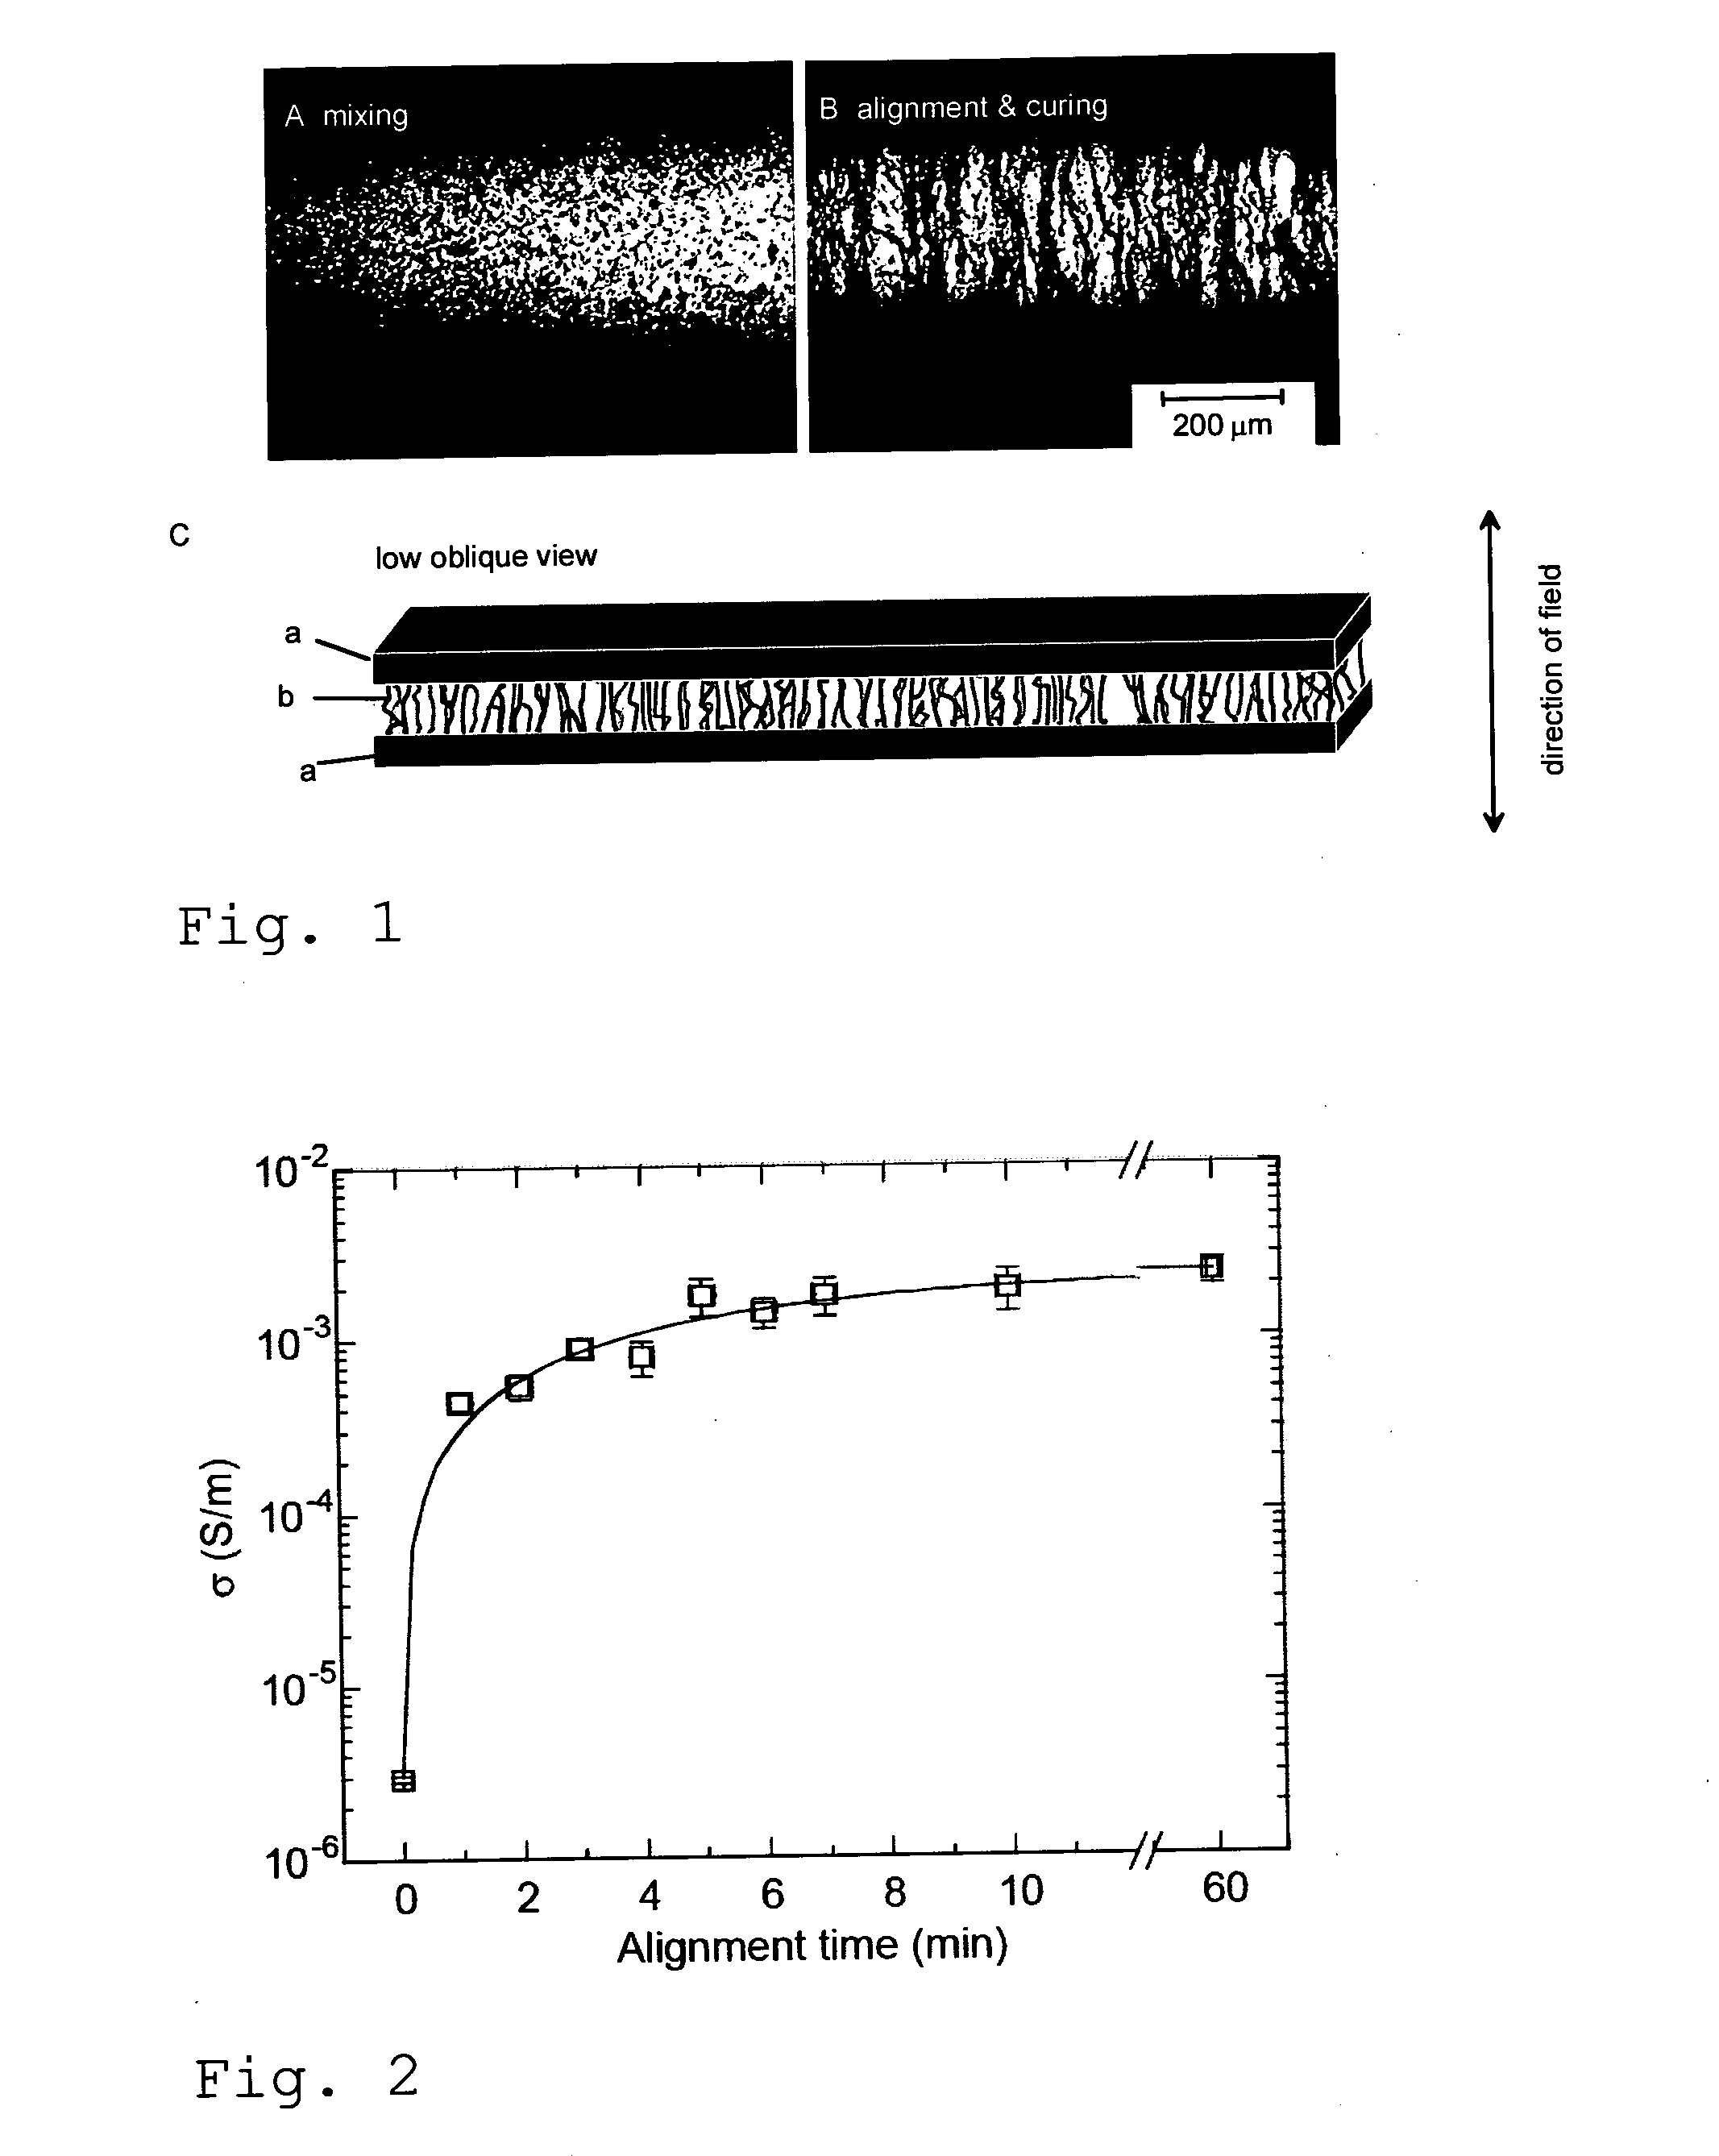 Anisotropic conducting body and method of manufacture